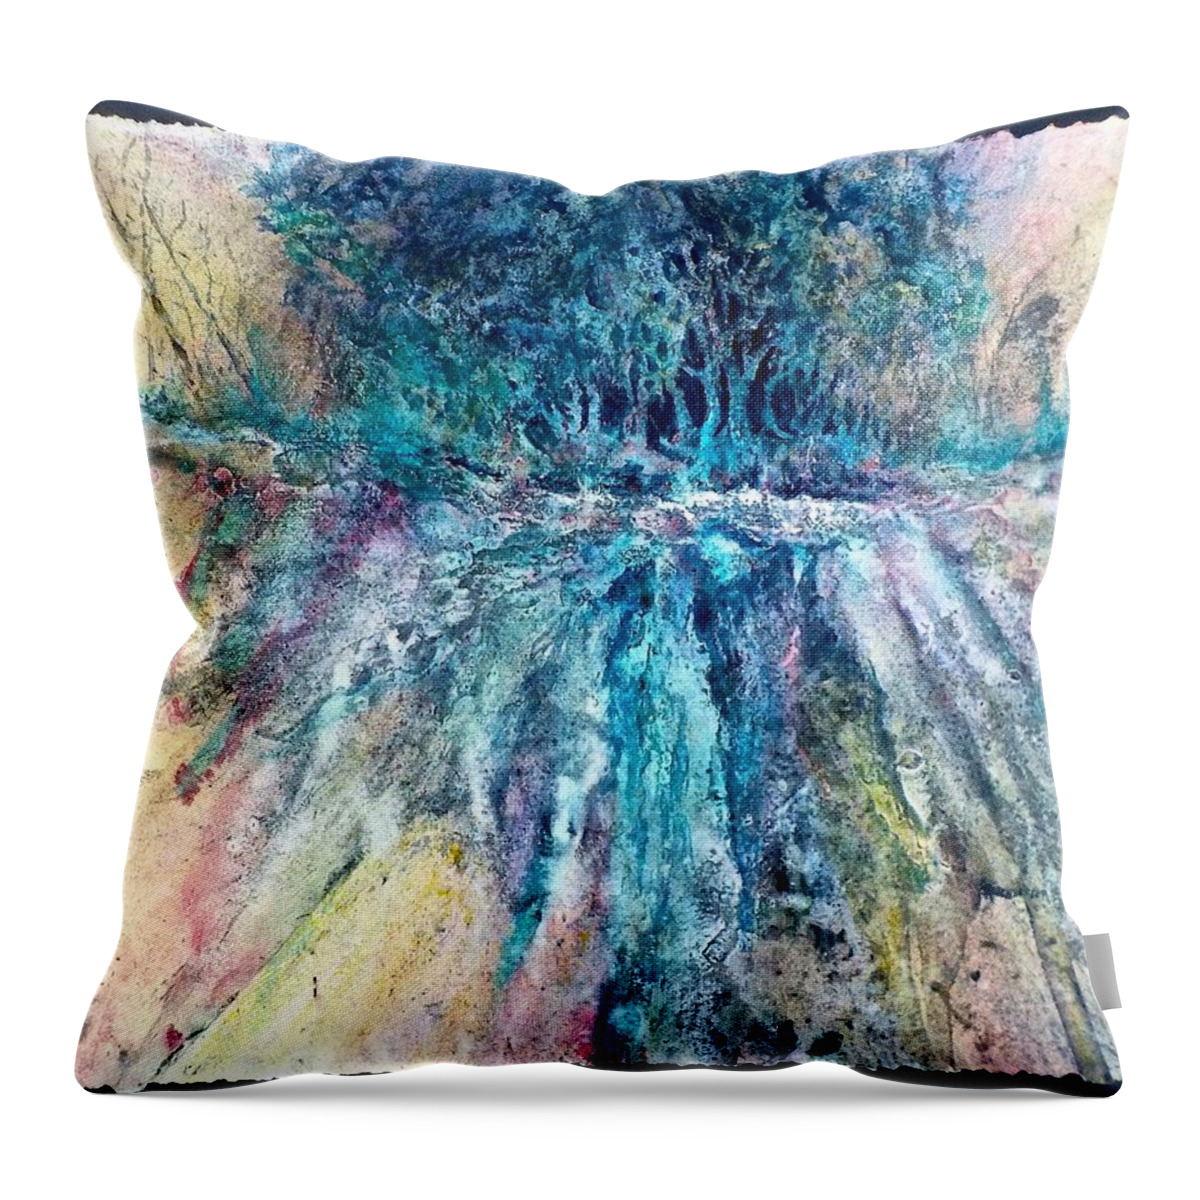 Mixed Media Throw Pillow featuring the painting Cascade Ridge by Carolyn Rosenberger